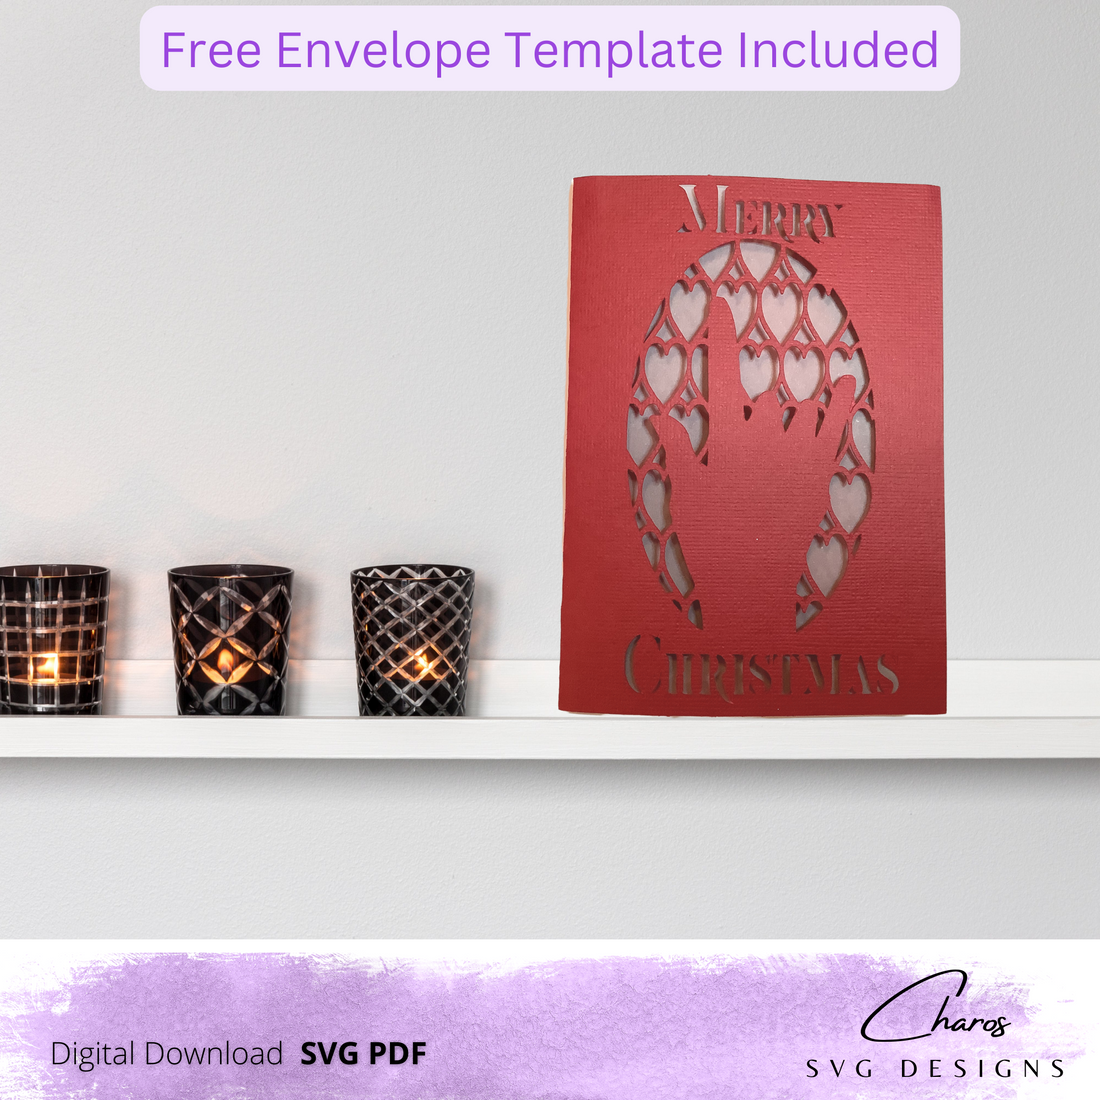 SVG: I Love You (In Sign Language)  Holiday Heart Card Bundle with Free Envelope! | Make Your Own | Card SVG | Greeting Card SVG |